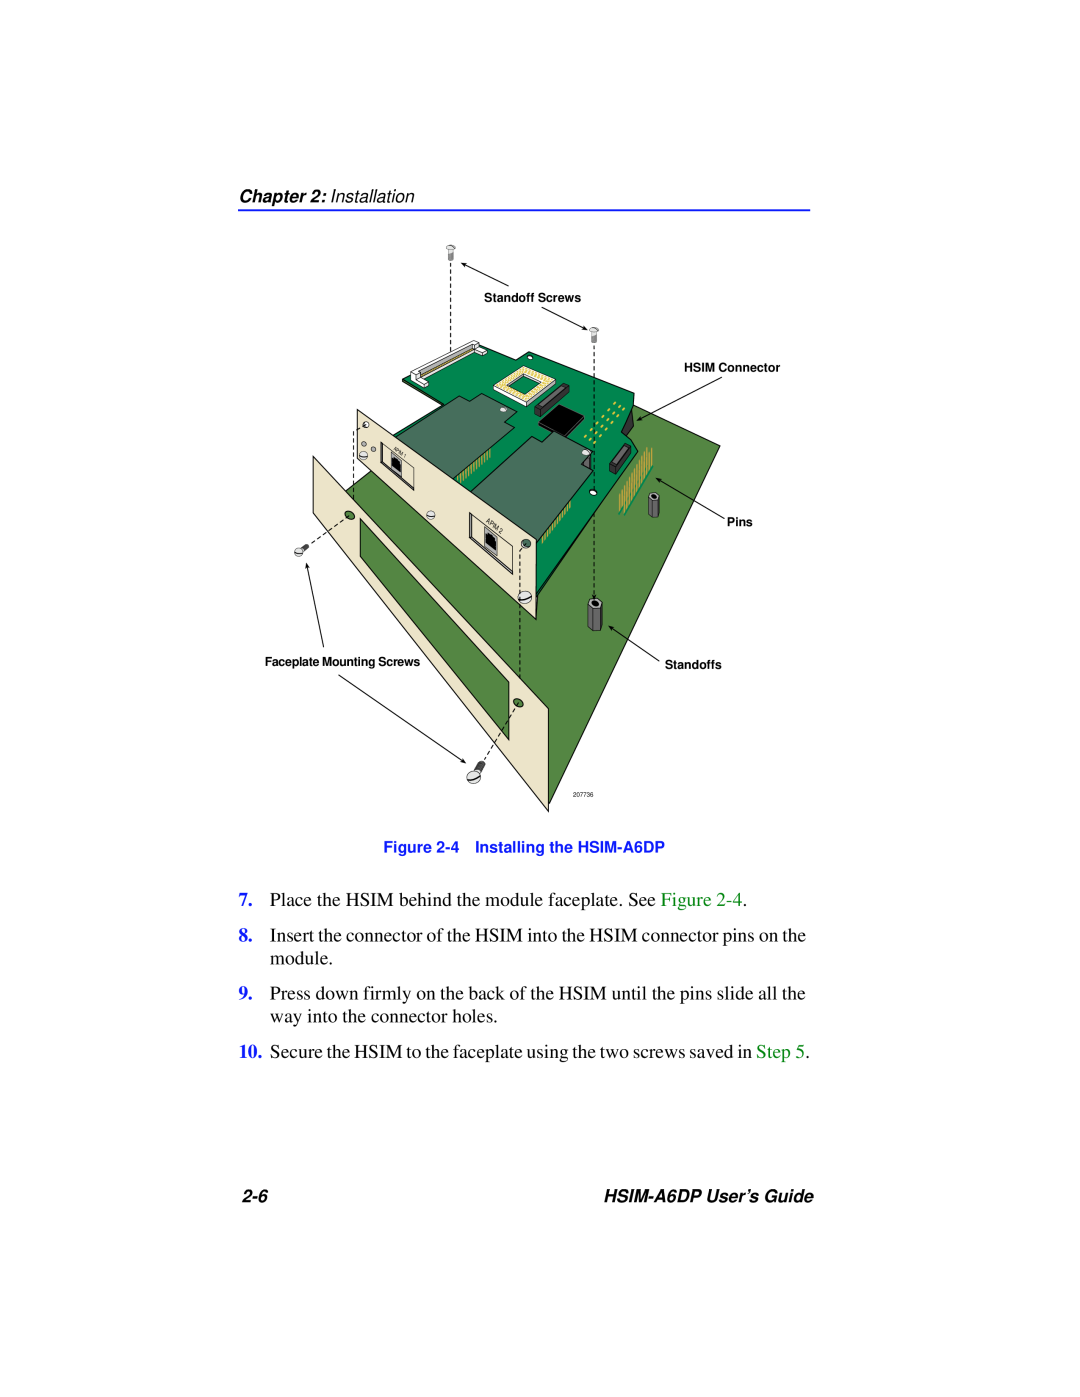 Cabletron Systems HSIM-A6DP manual Place the HSIM behind the module faceplate. See Figure 